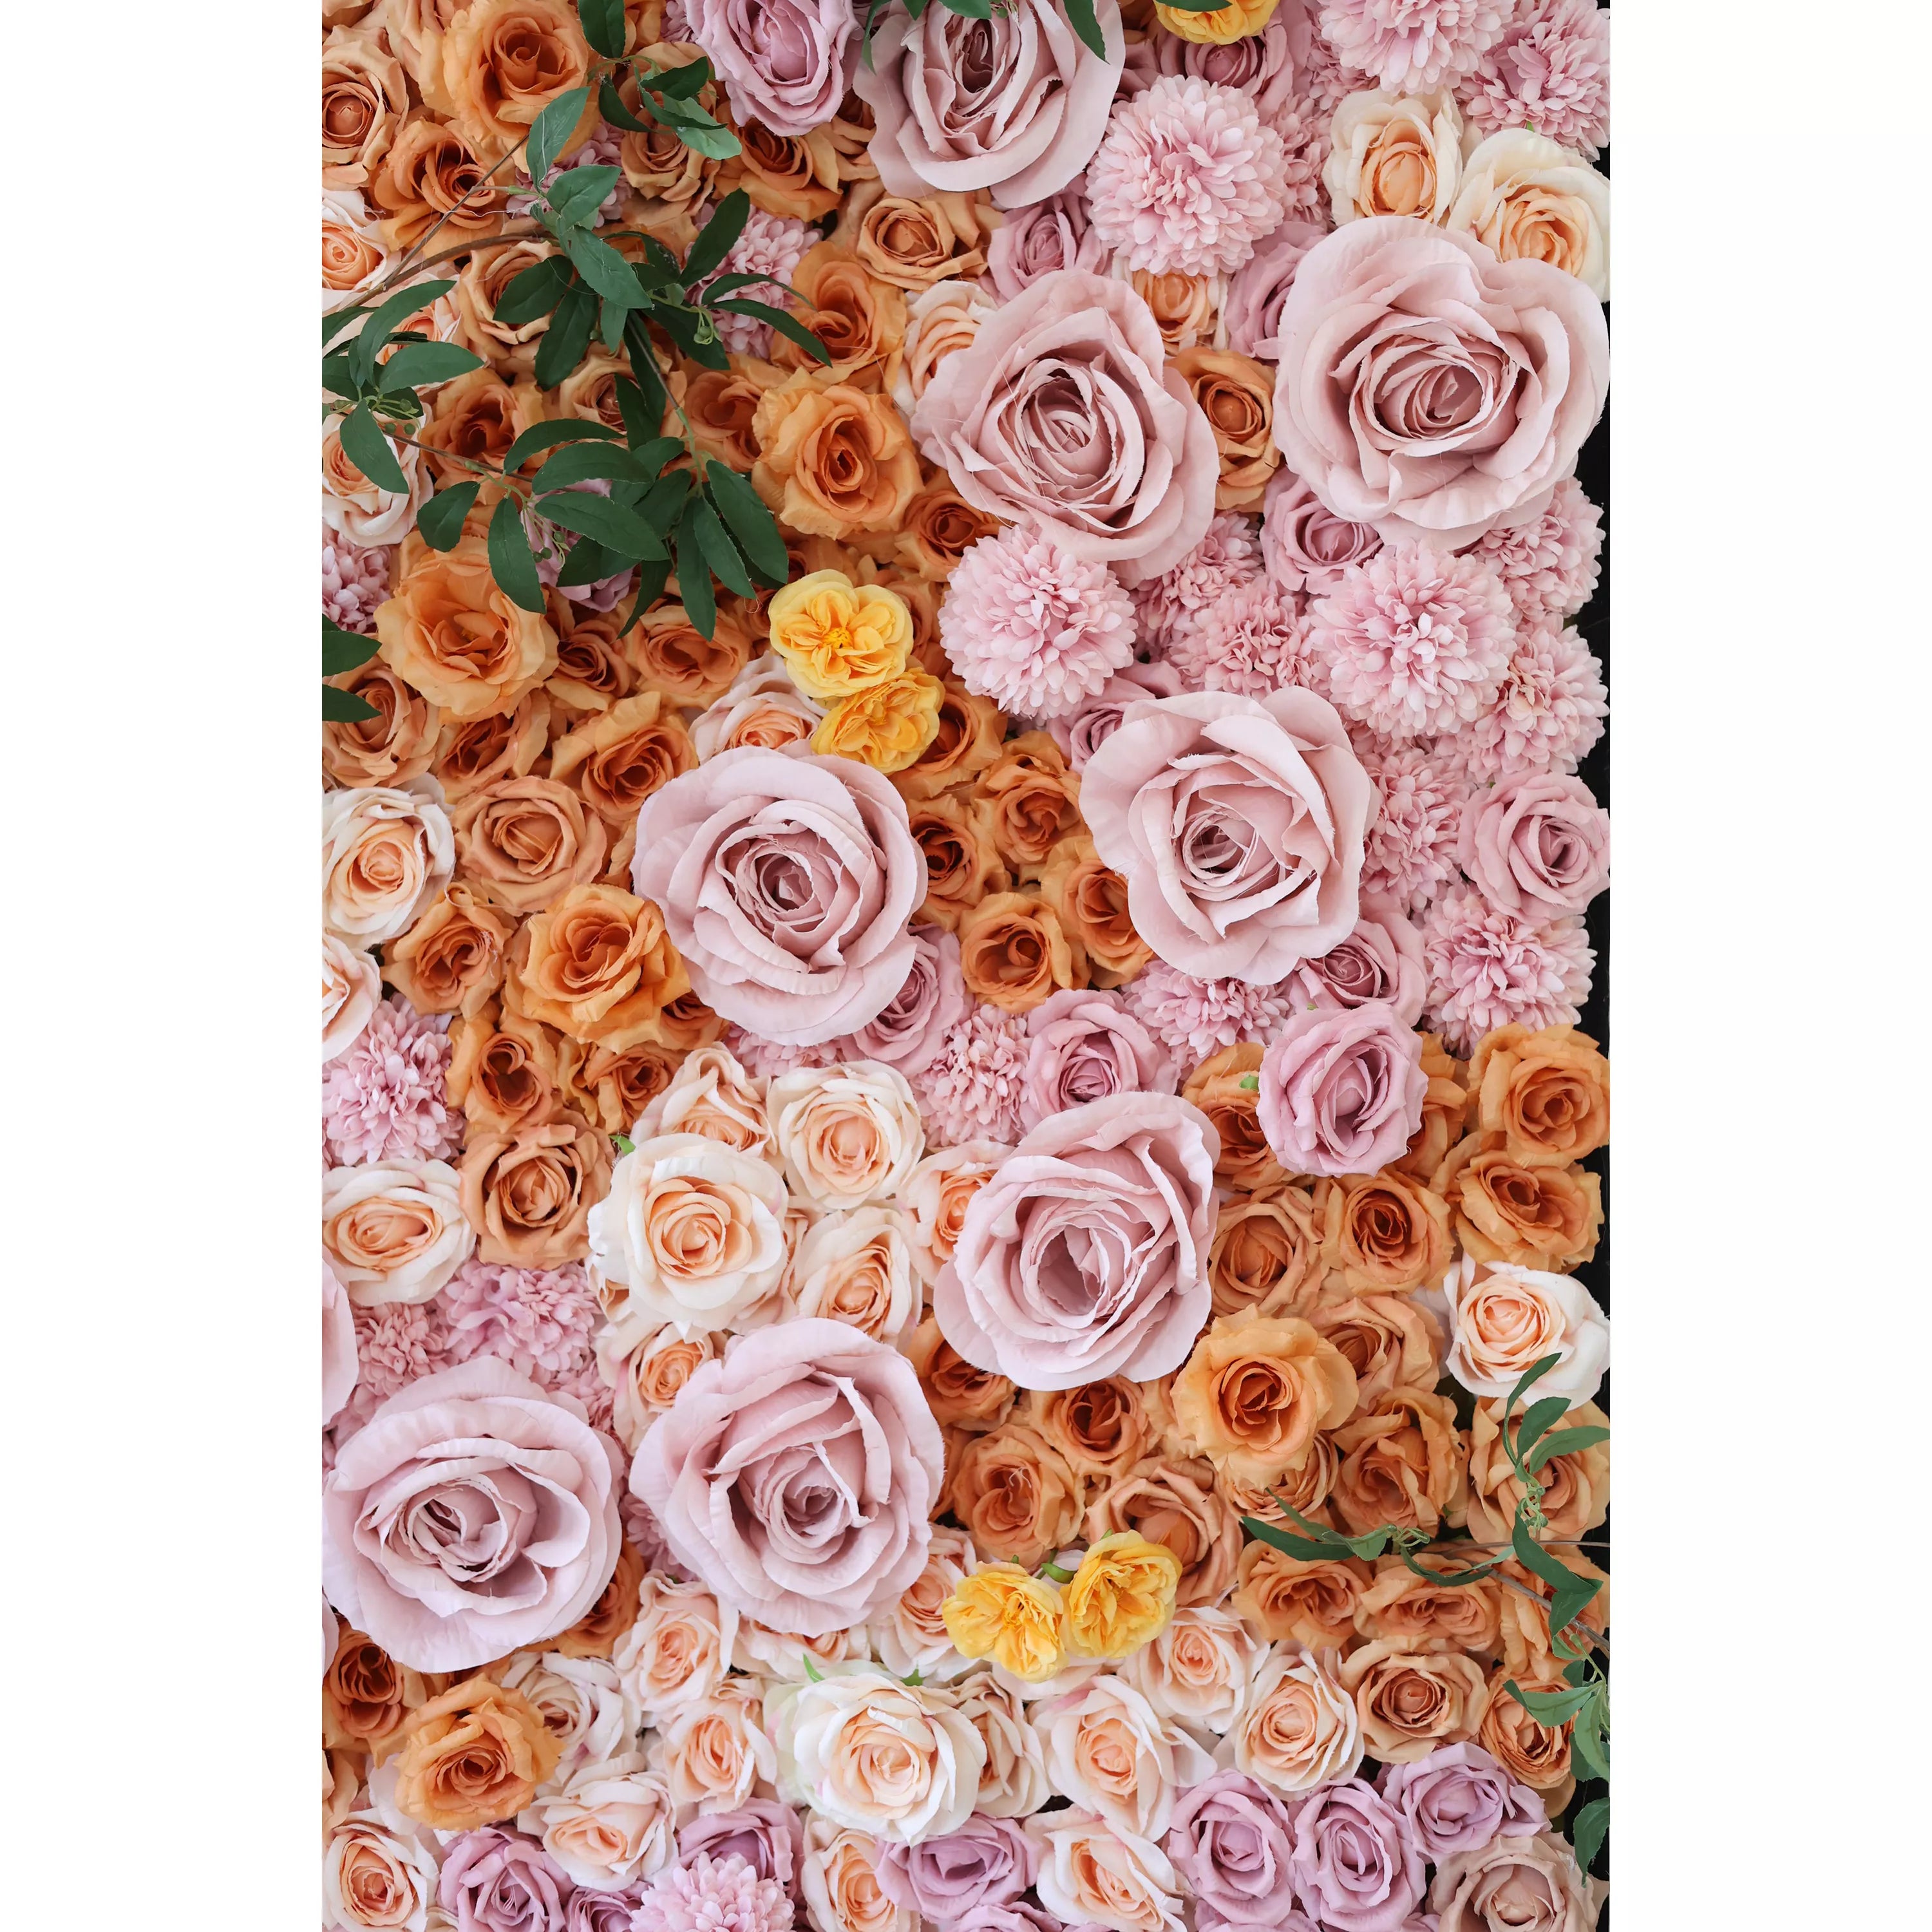 Detail look of ValarFlowers lush pink floral wall, boasting a rich blend of roses in warm hues. Ideal for spa settings or events, it offers a touch of elegance and nature-inspired tranquility. A must-have backdrop for any luxurious setting.